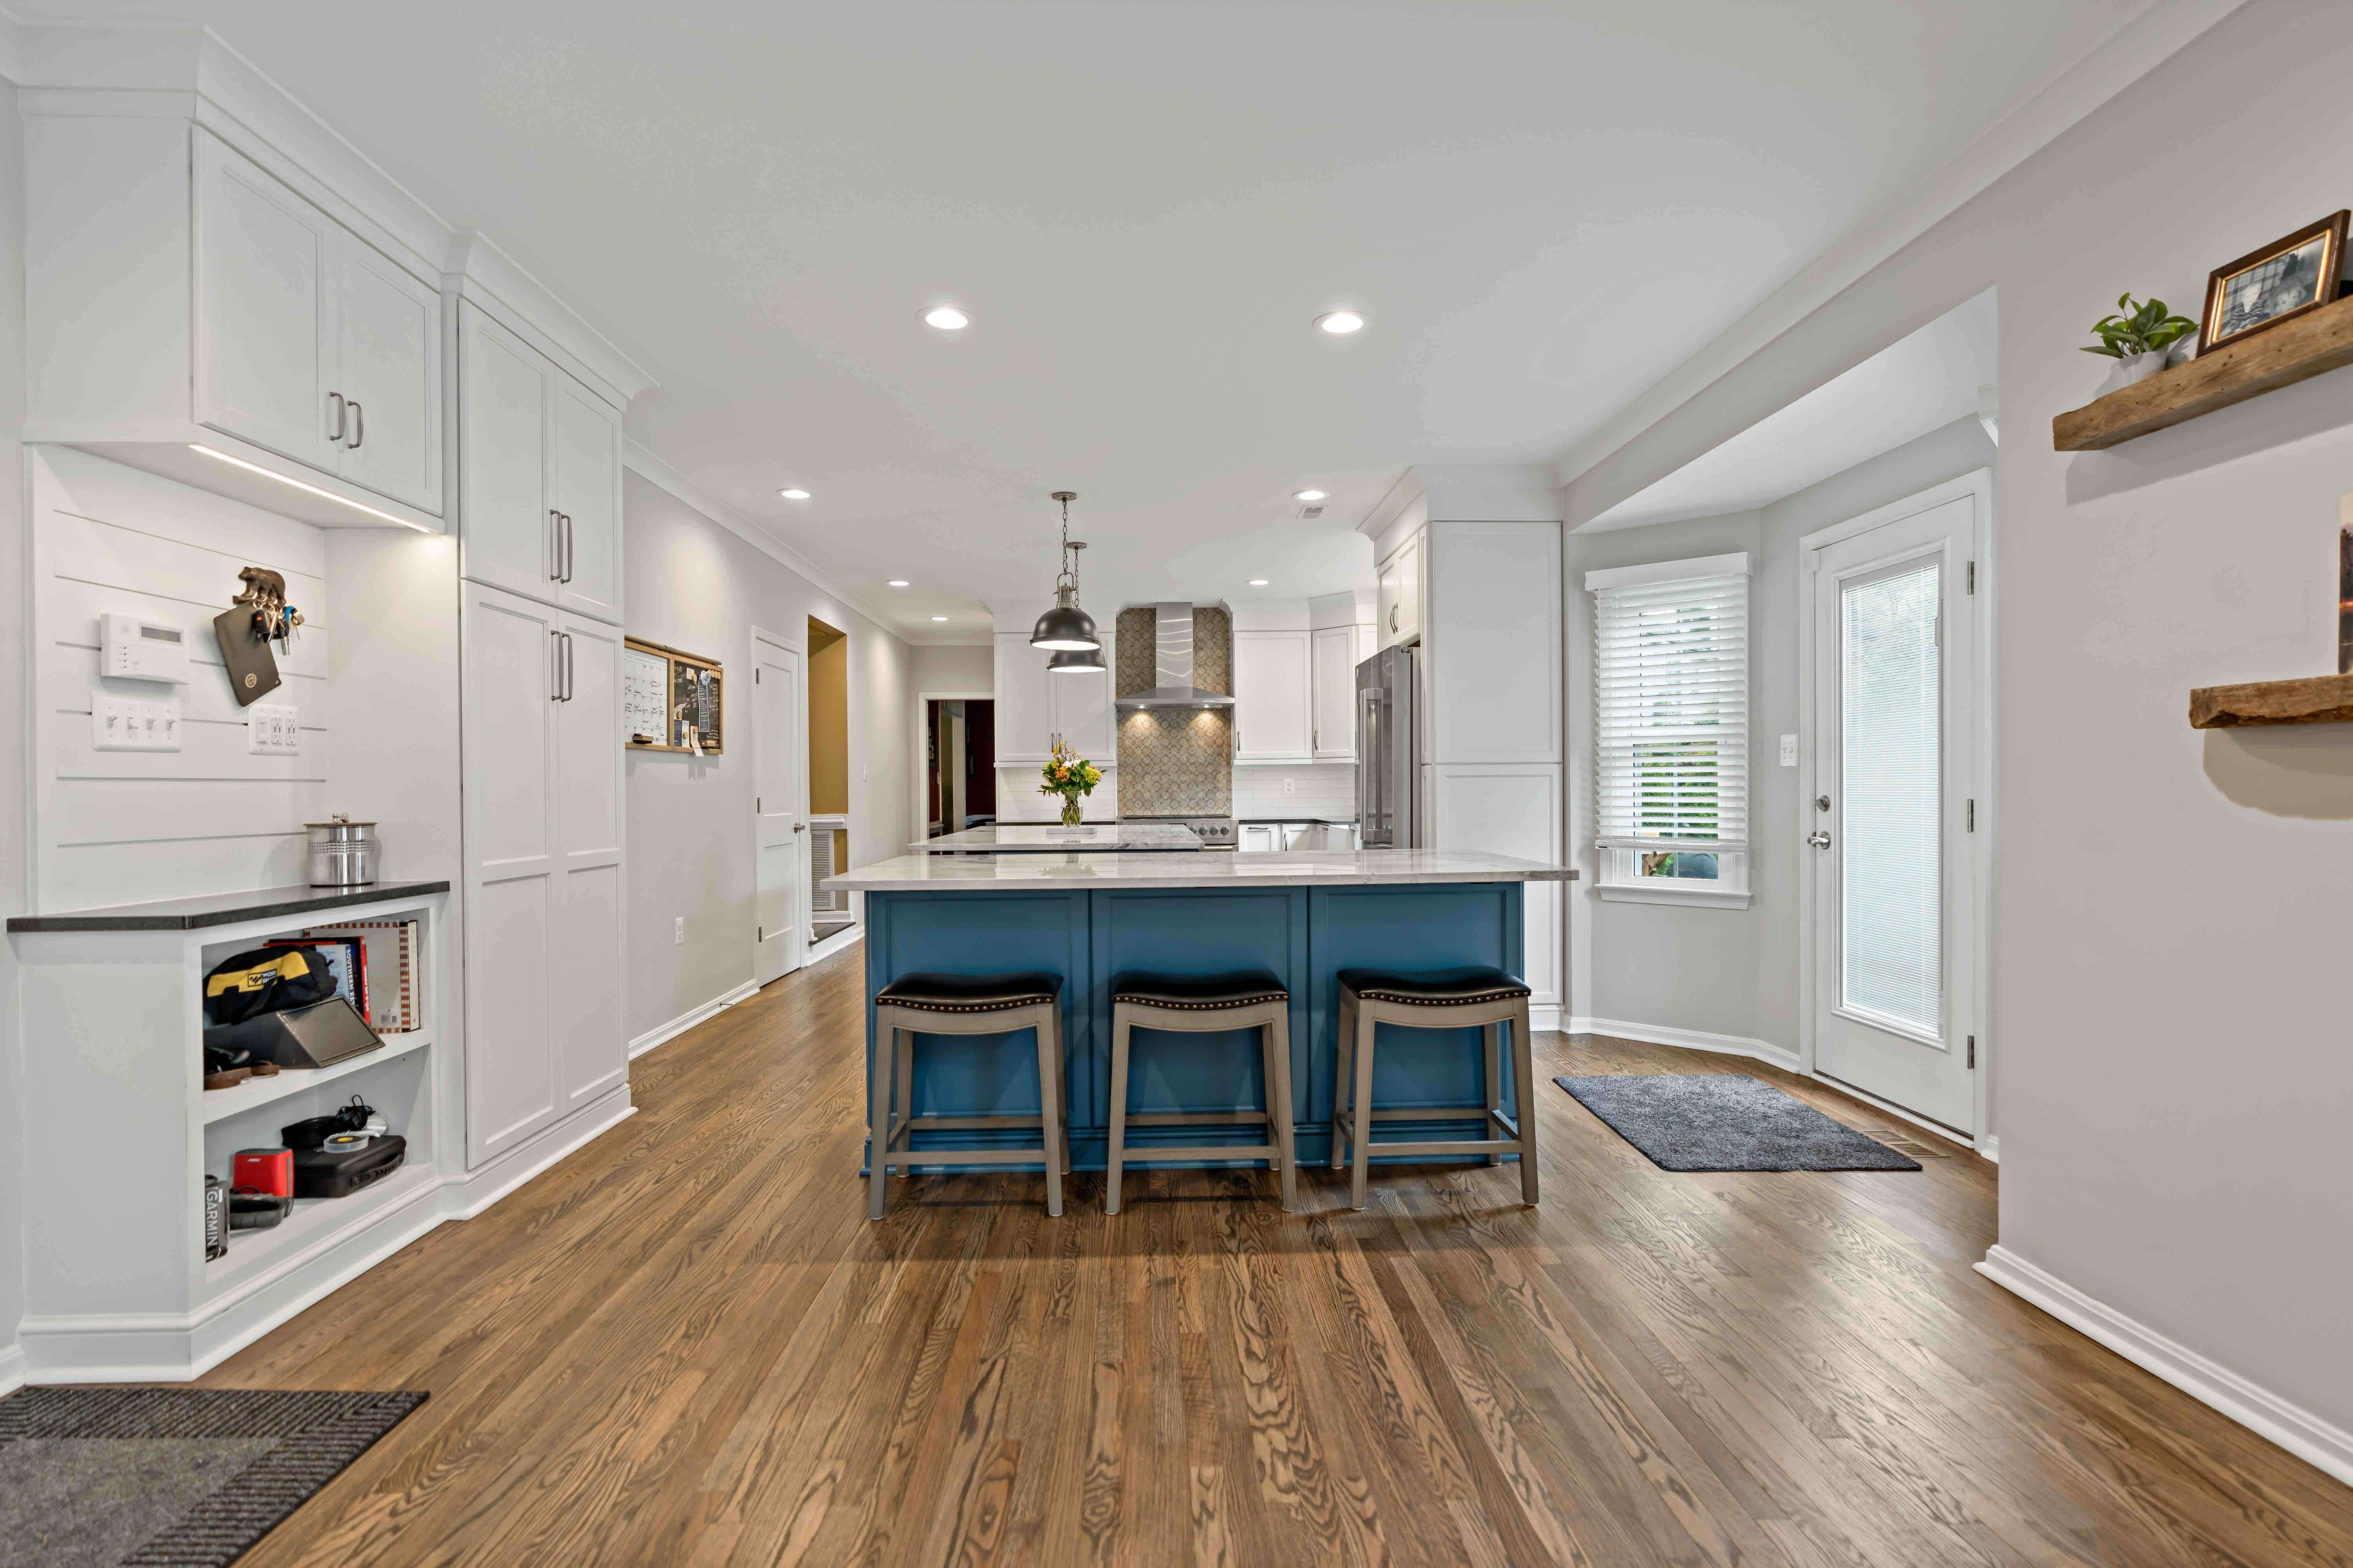 Hard wood floors in spacious all white kitchen remodel